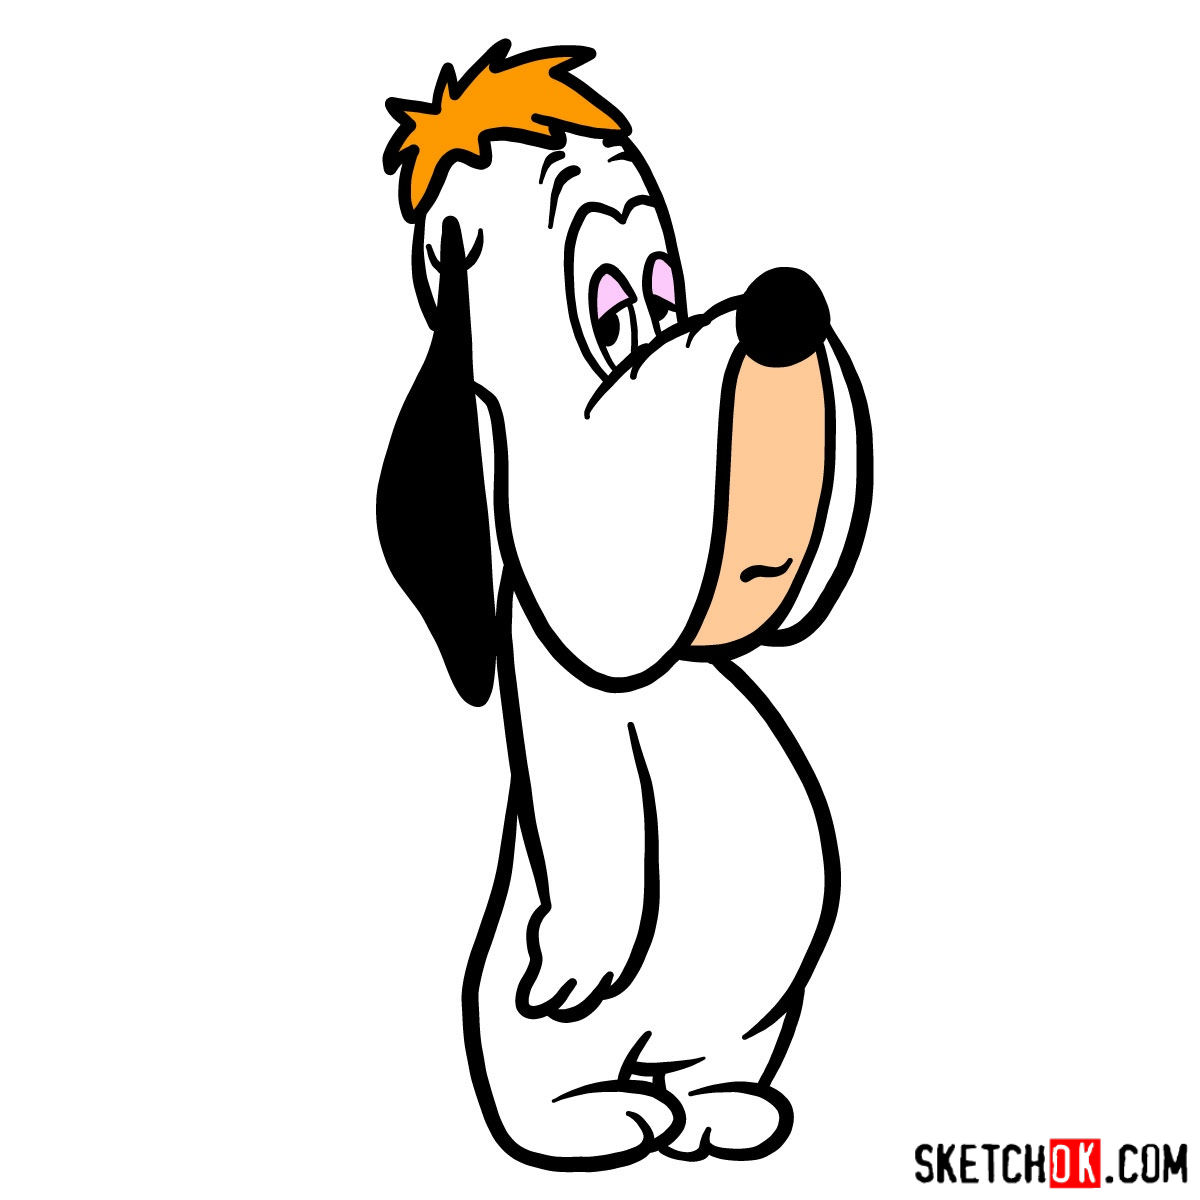 How to draw Droopy Dog